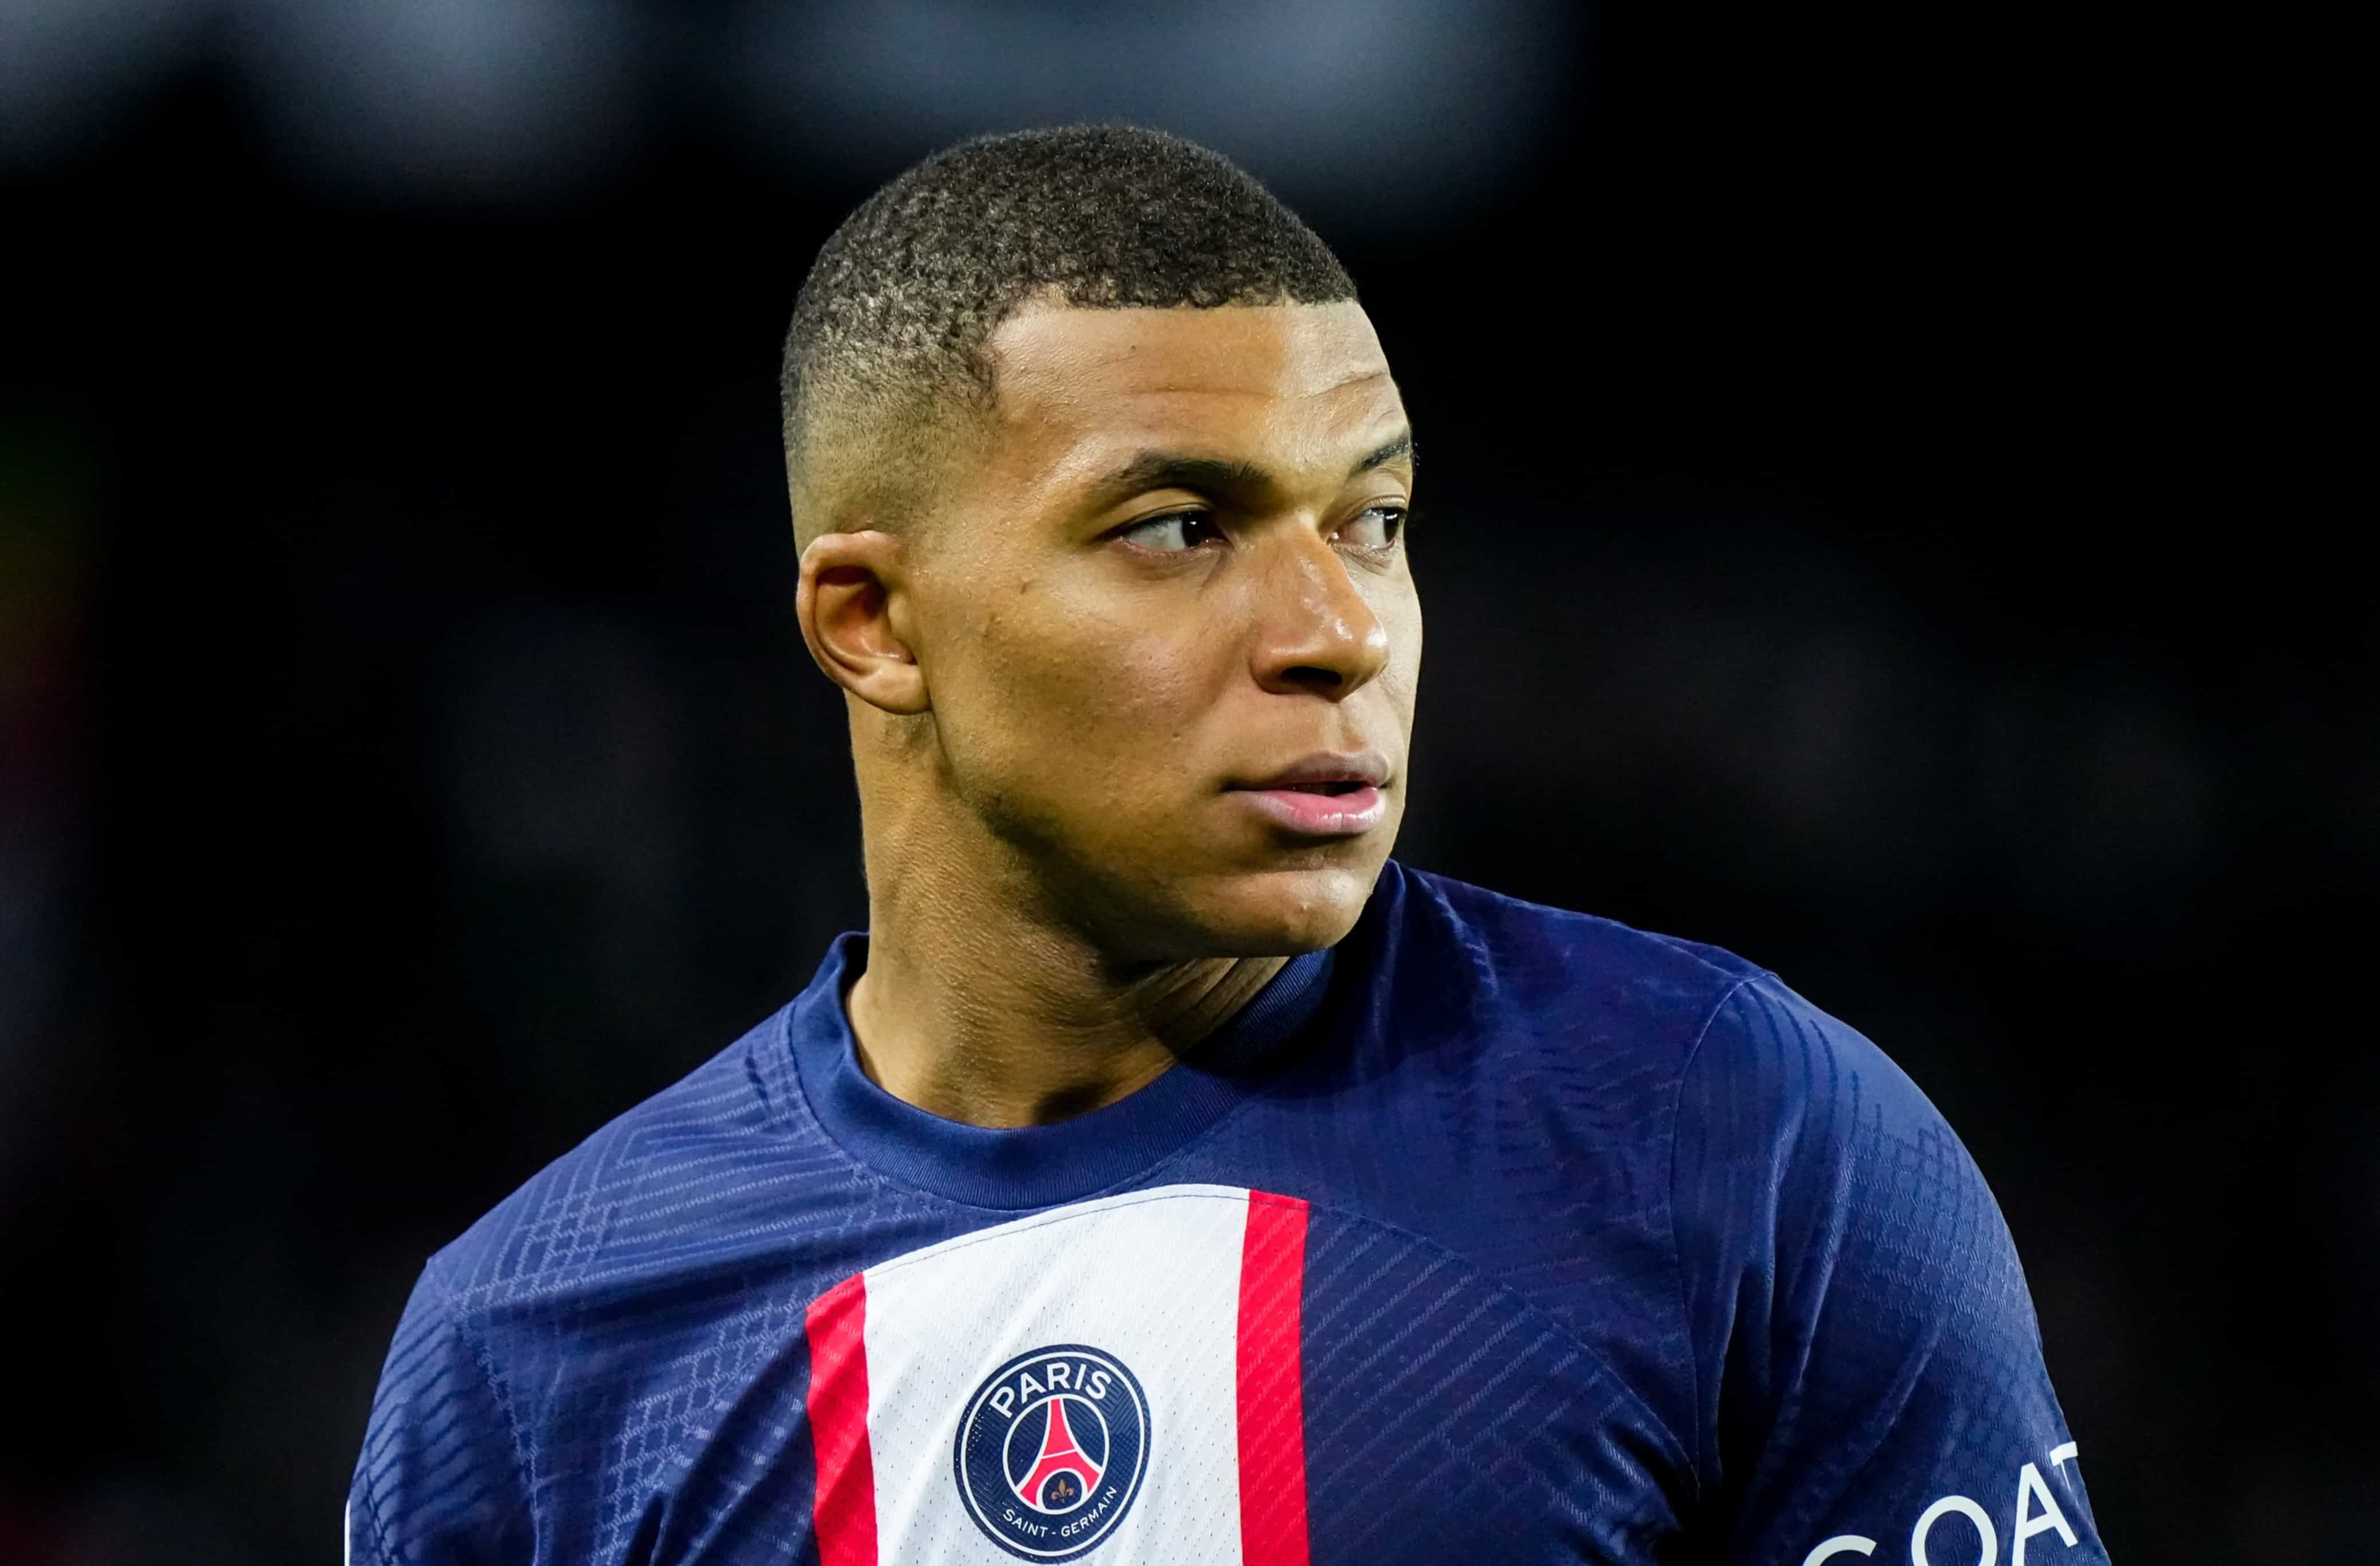 PSG may have some spare cash if Mbappe forces his way out